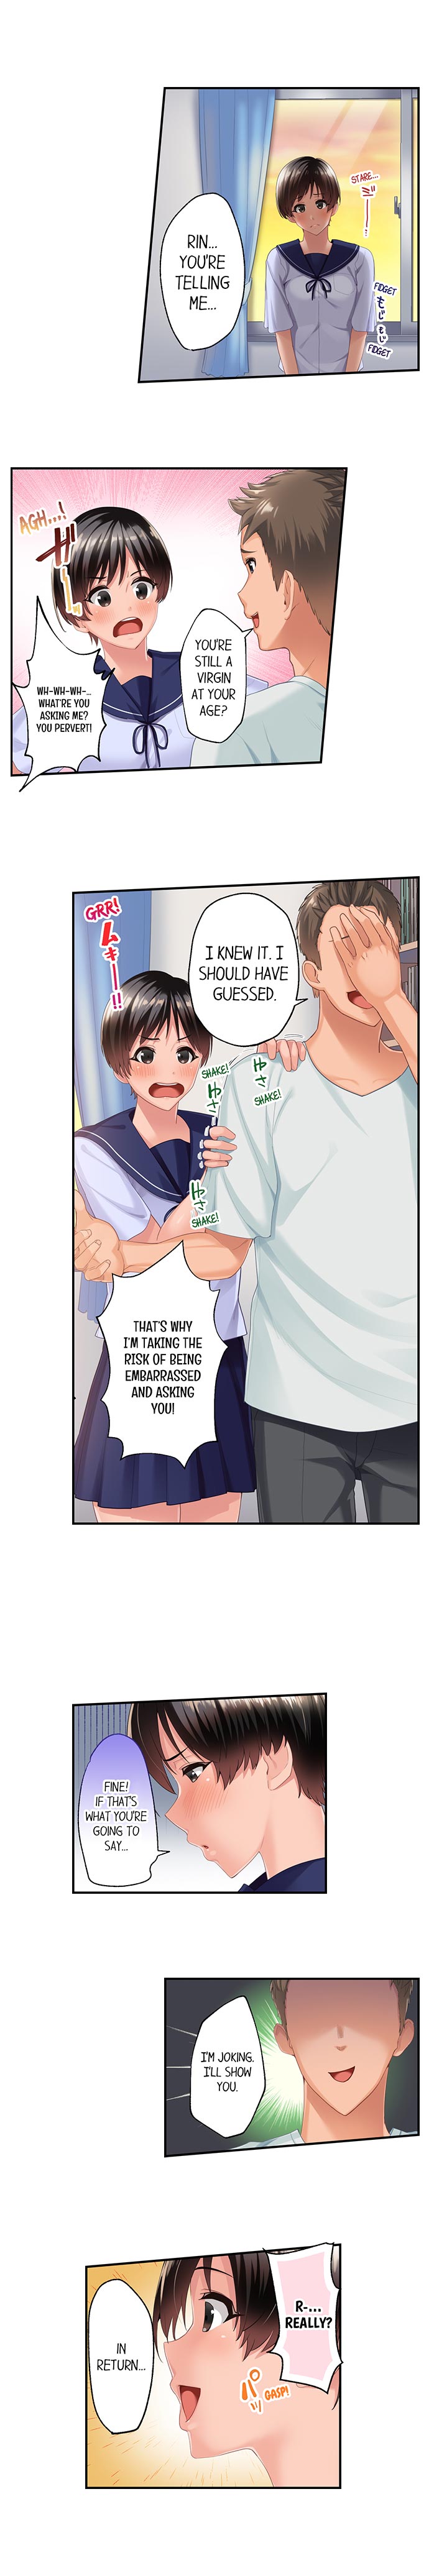 Using 100 Boxes of Condoms With My Childhood Friend! - Chapter 2 Page 3